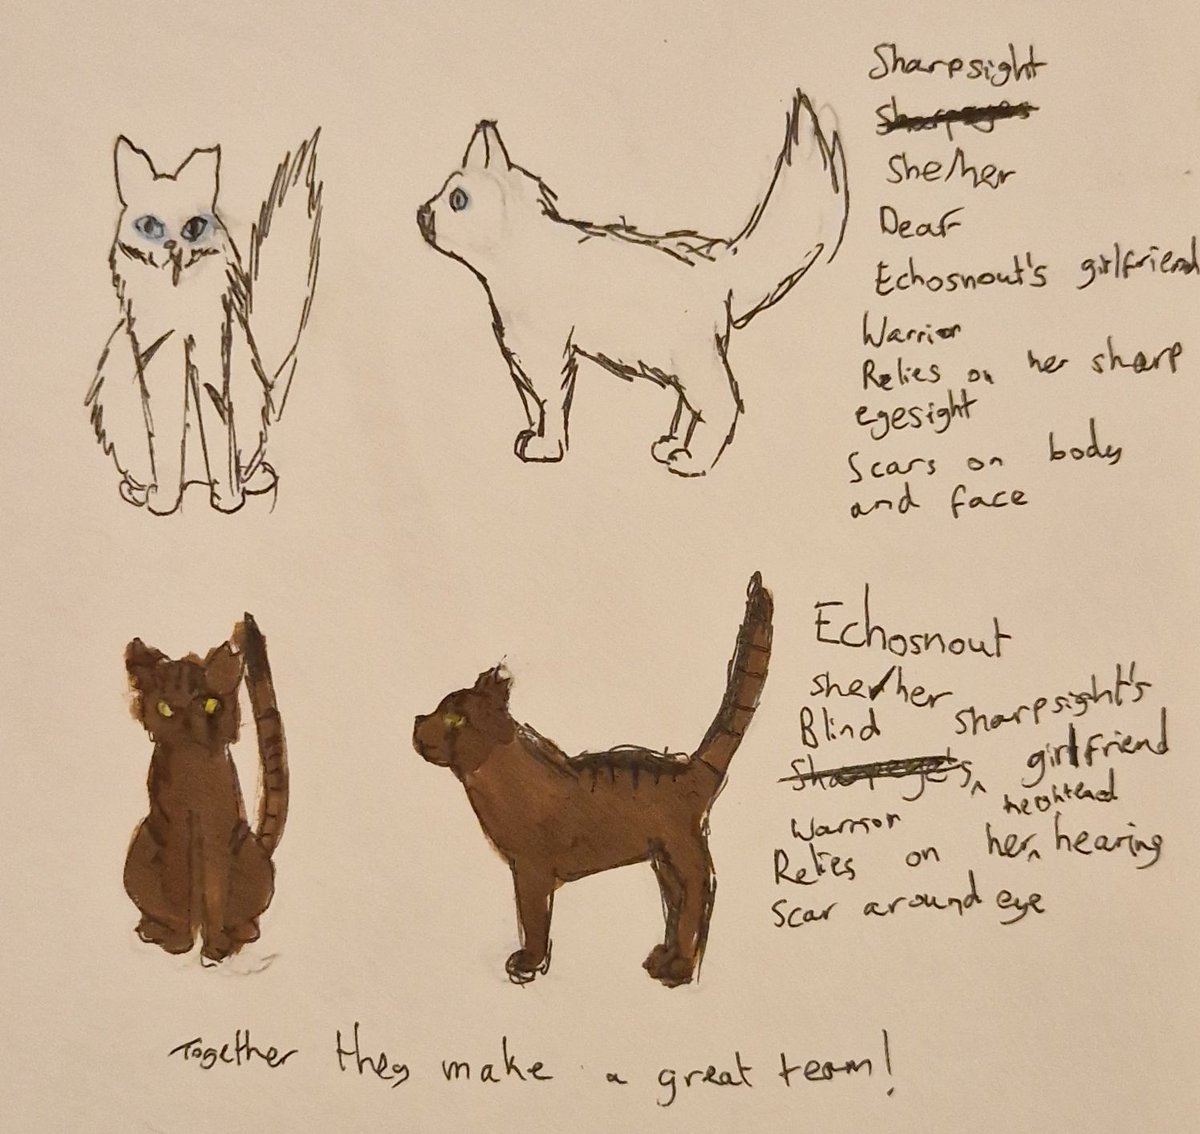 These are my Warrior Cats ocs Sharpsight and Echosnout!

Sharpsight is named after her sharp eyesight and Echosnout is named after her heightened sense of hearing and loud voice.

Sharpsight is more outgoing whilst Echosnout is more reserved.